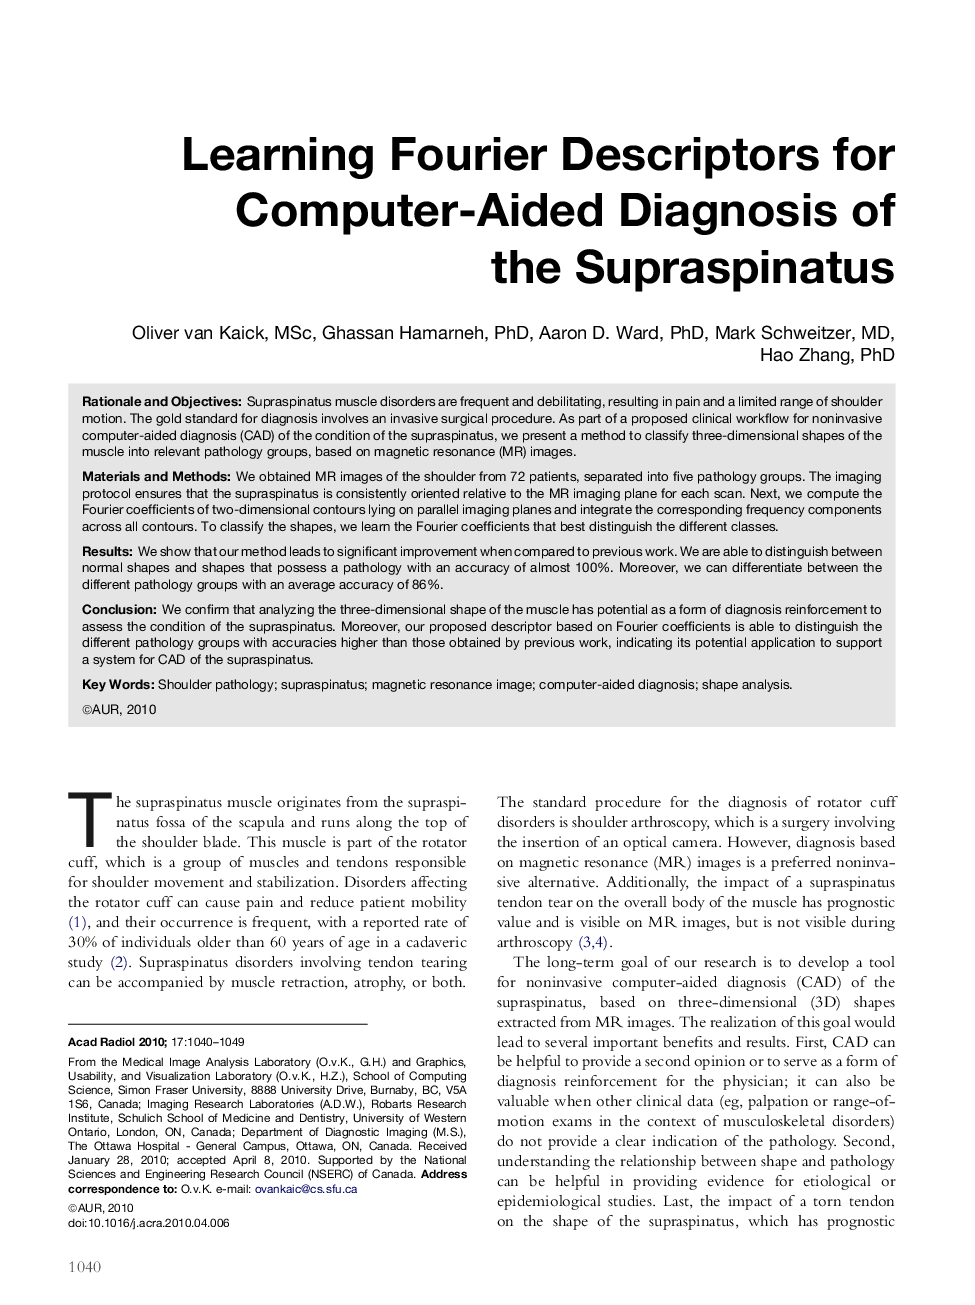 Learning Fourier Descriptors for Computer-Aided Diagnosis of the Supraspinatus